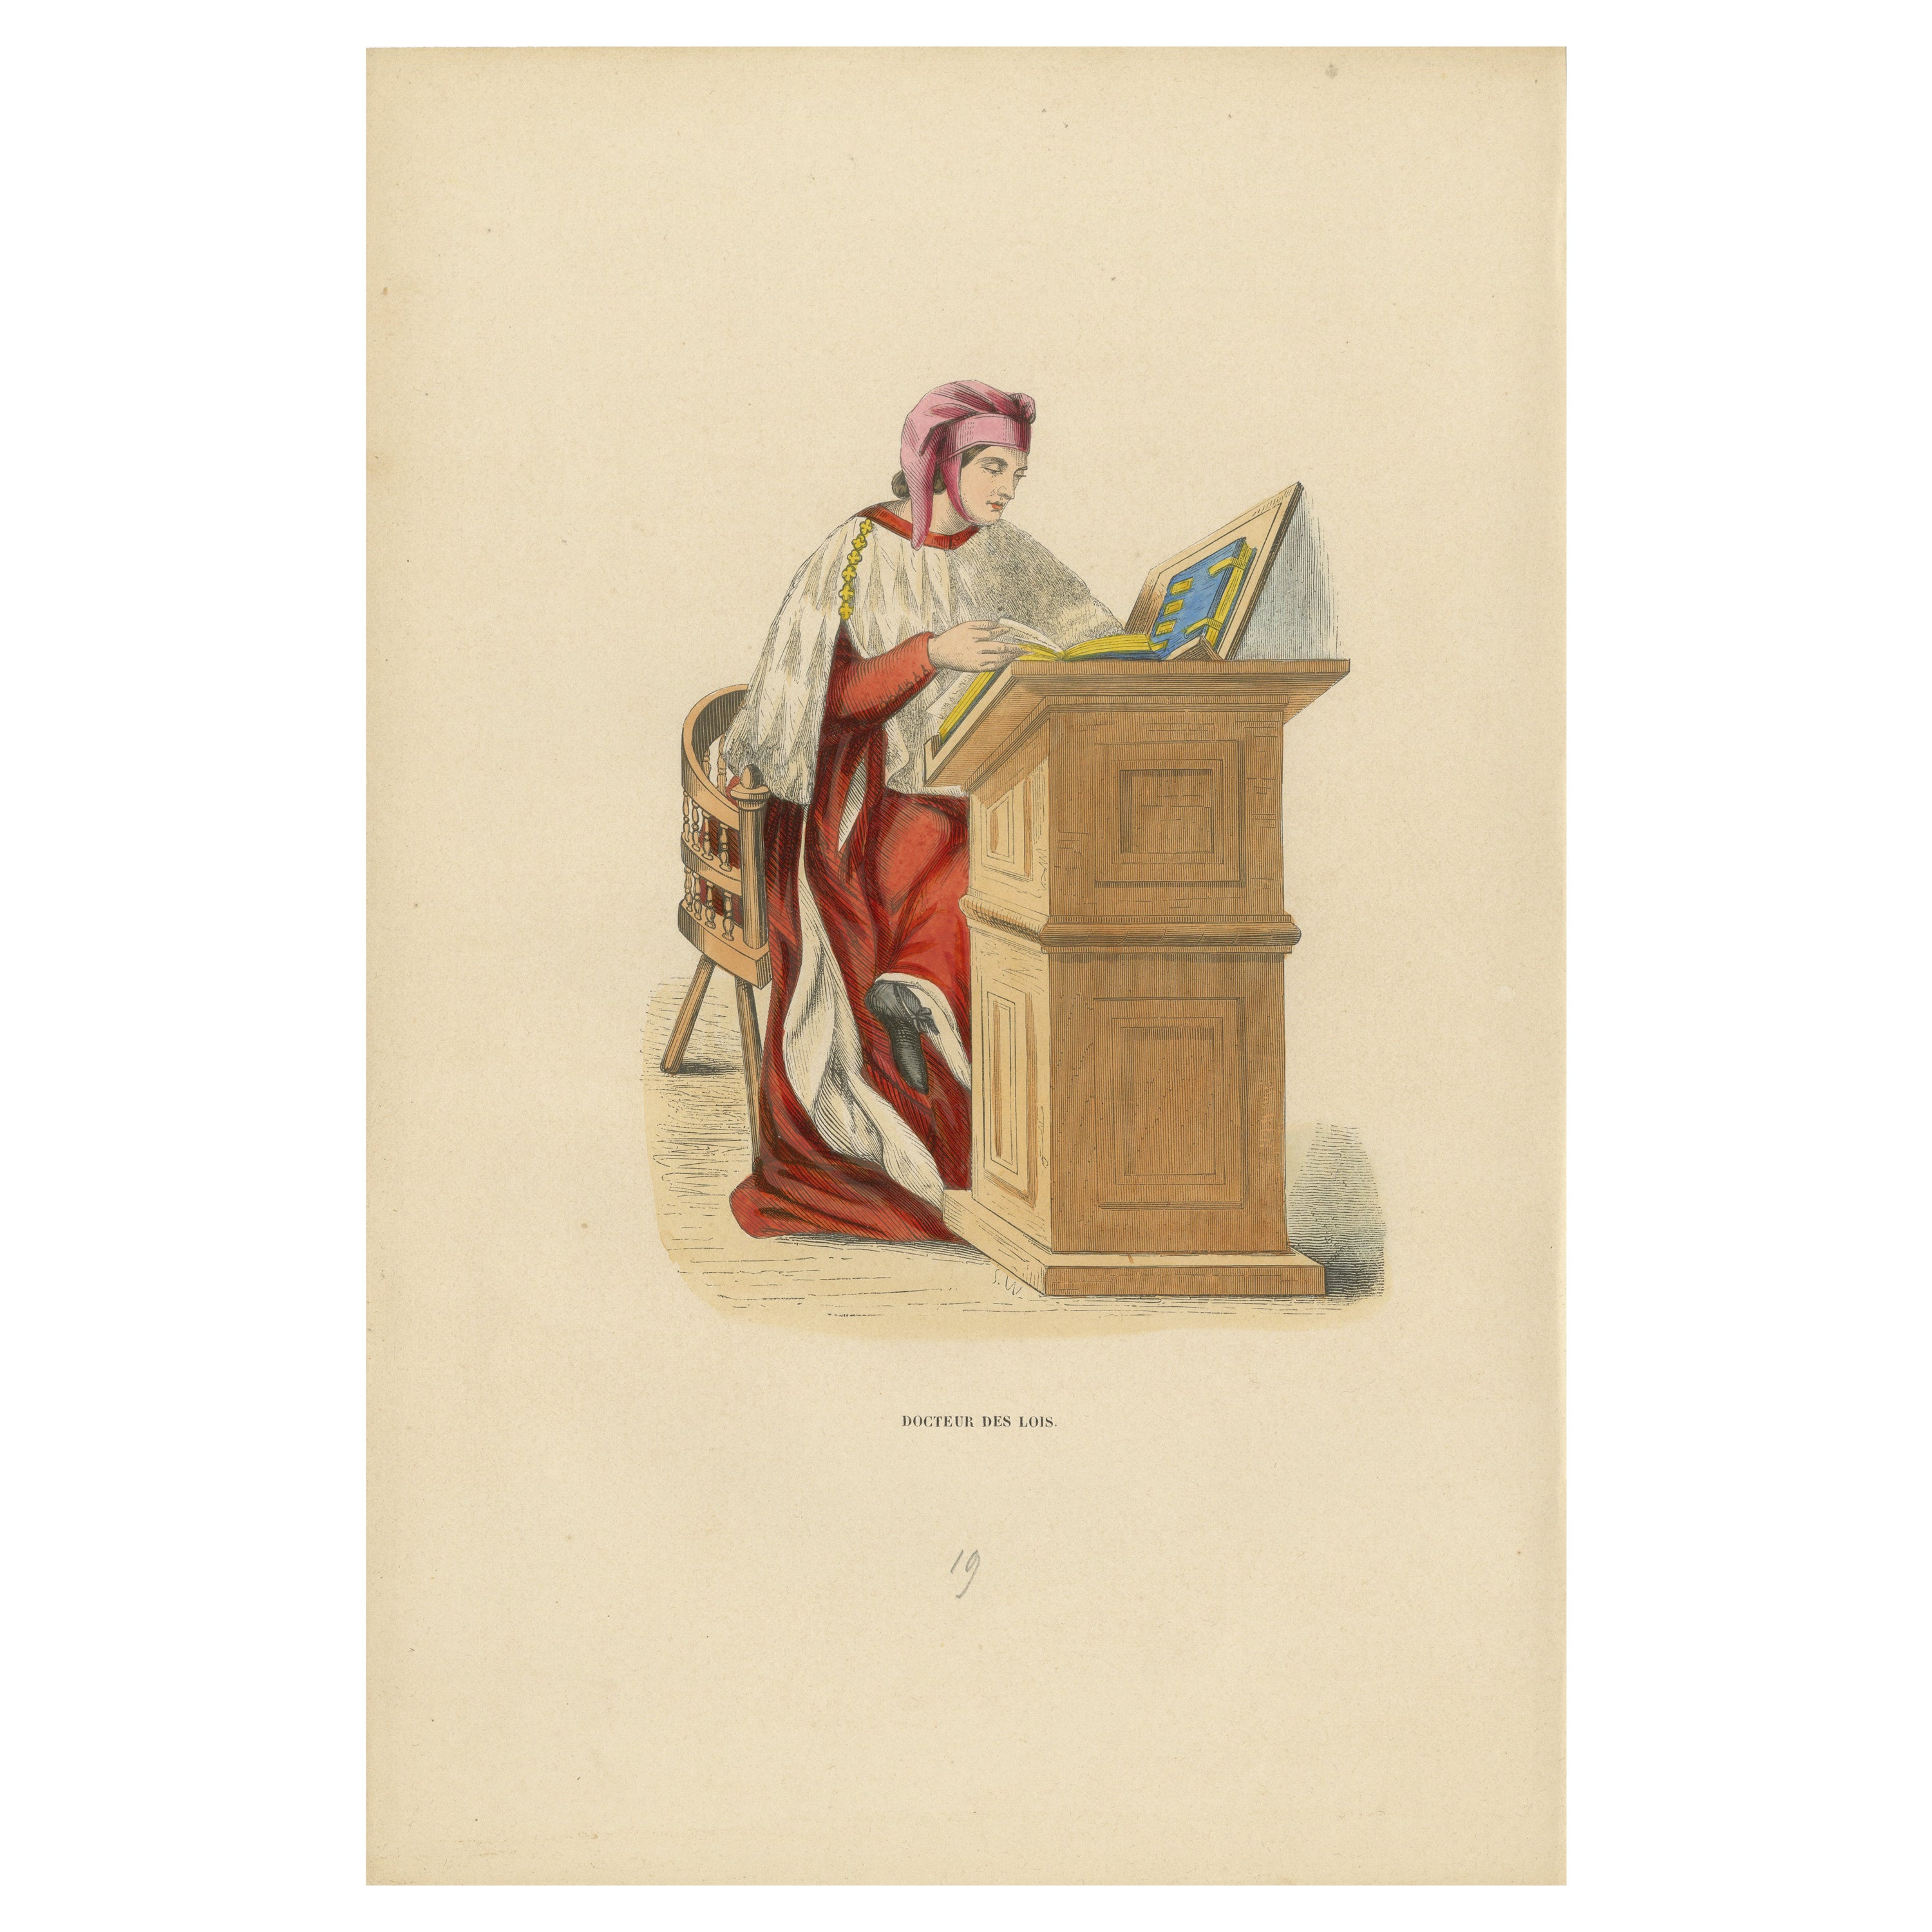 Scholar of the Codex: A Medieval Jurist in Study, 1847